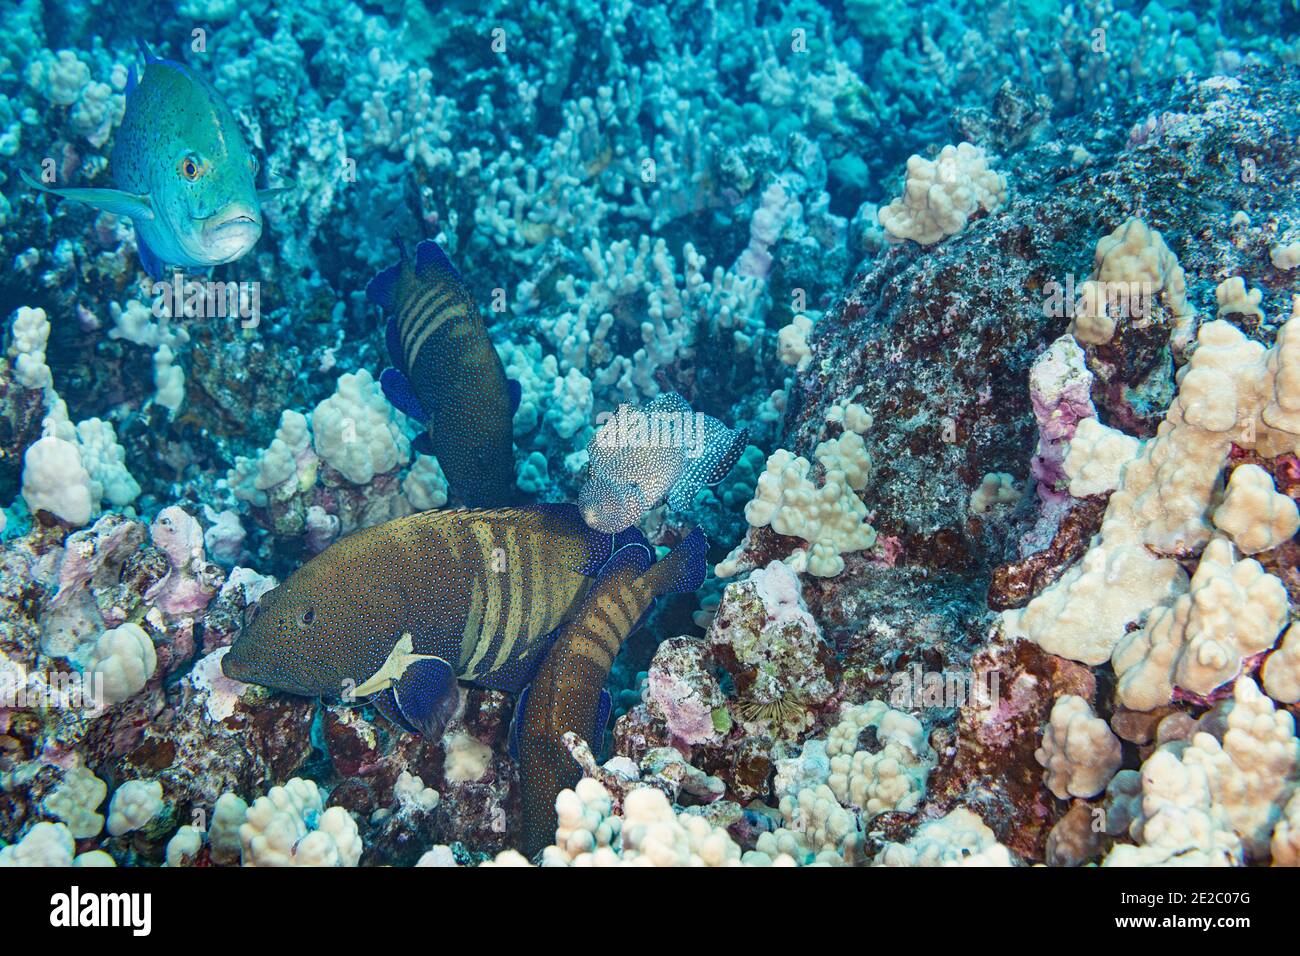 Hunting coalition of peacock groupers, bluefin trevally, and whitemouth moray eel; Groupers and jacks block openings in reef while eel hunts inside. Stock Photo